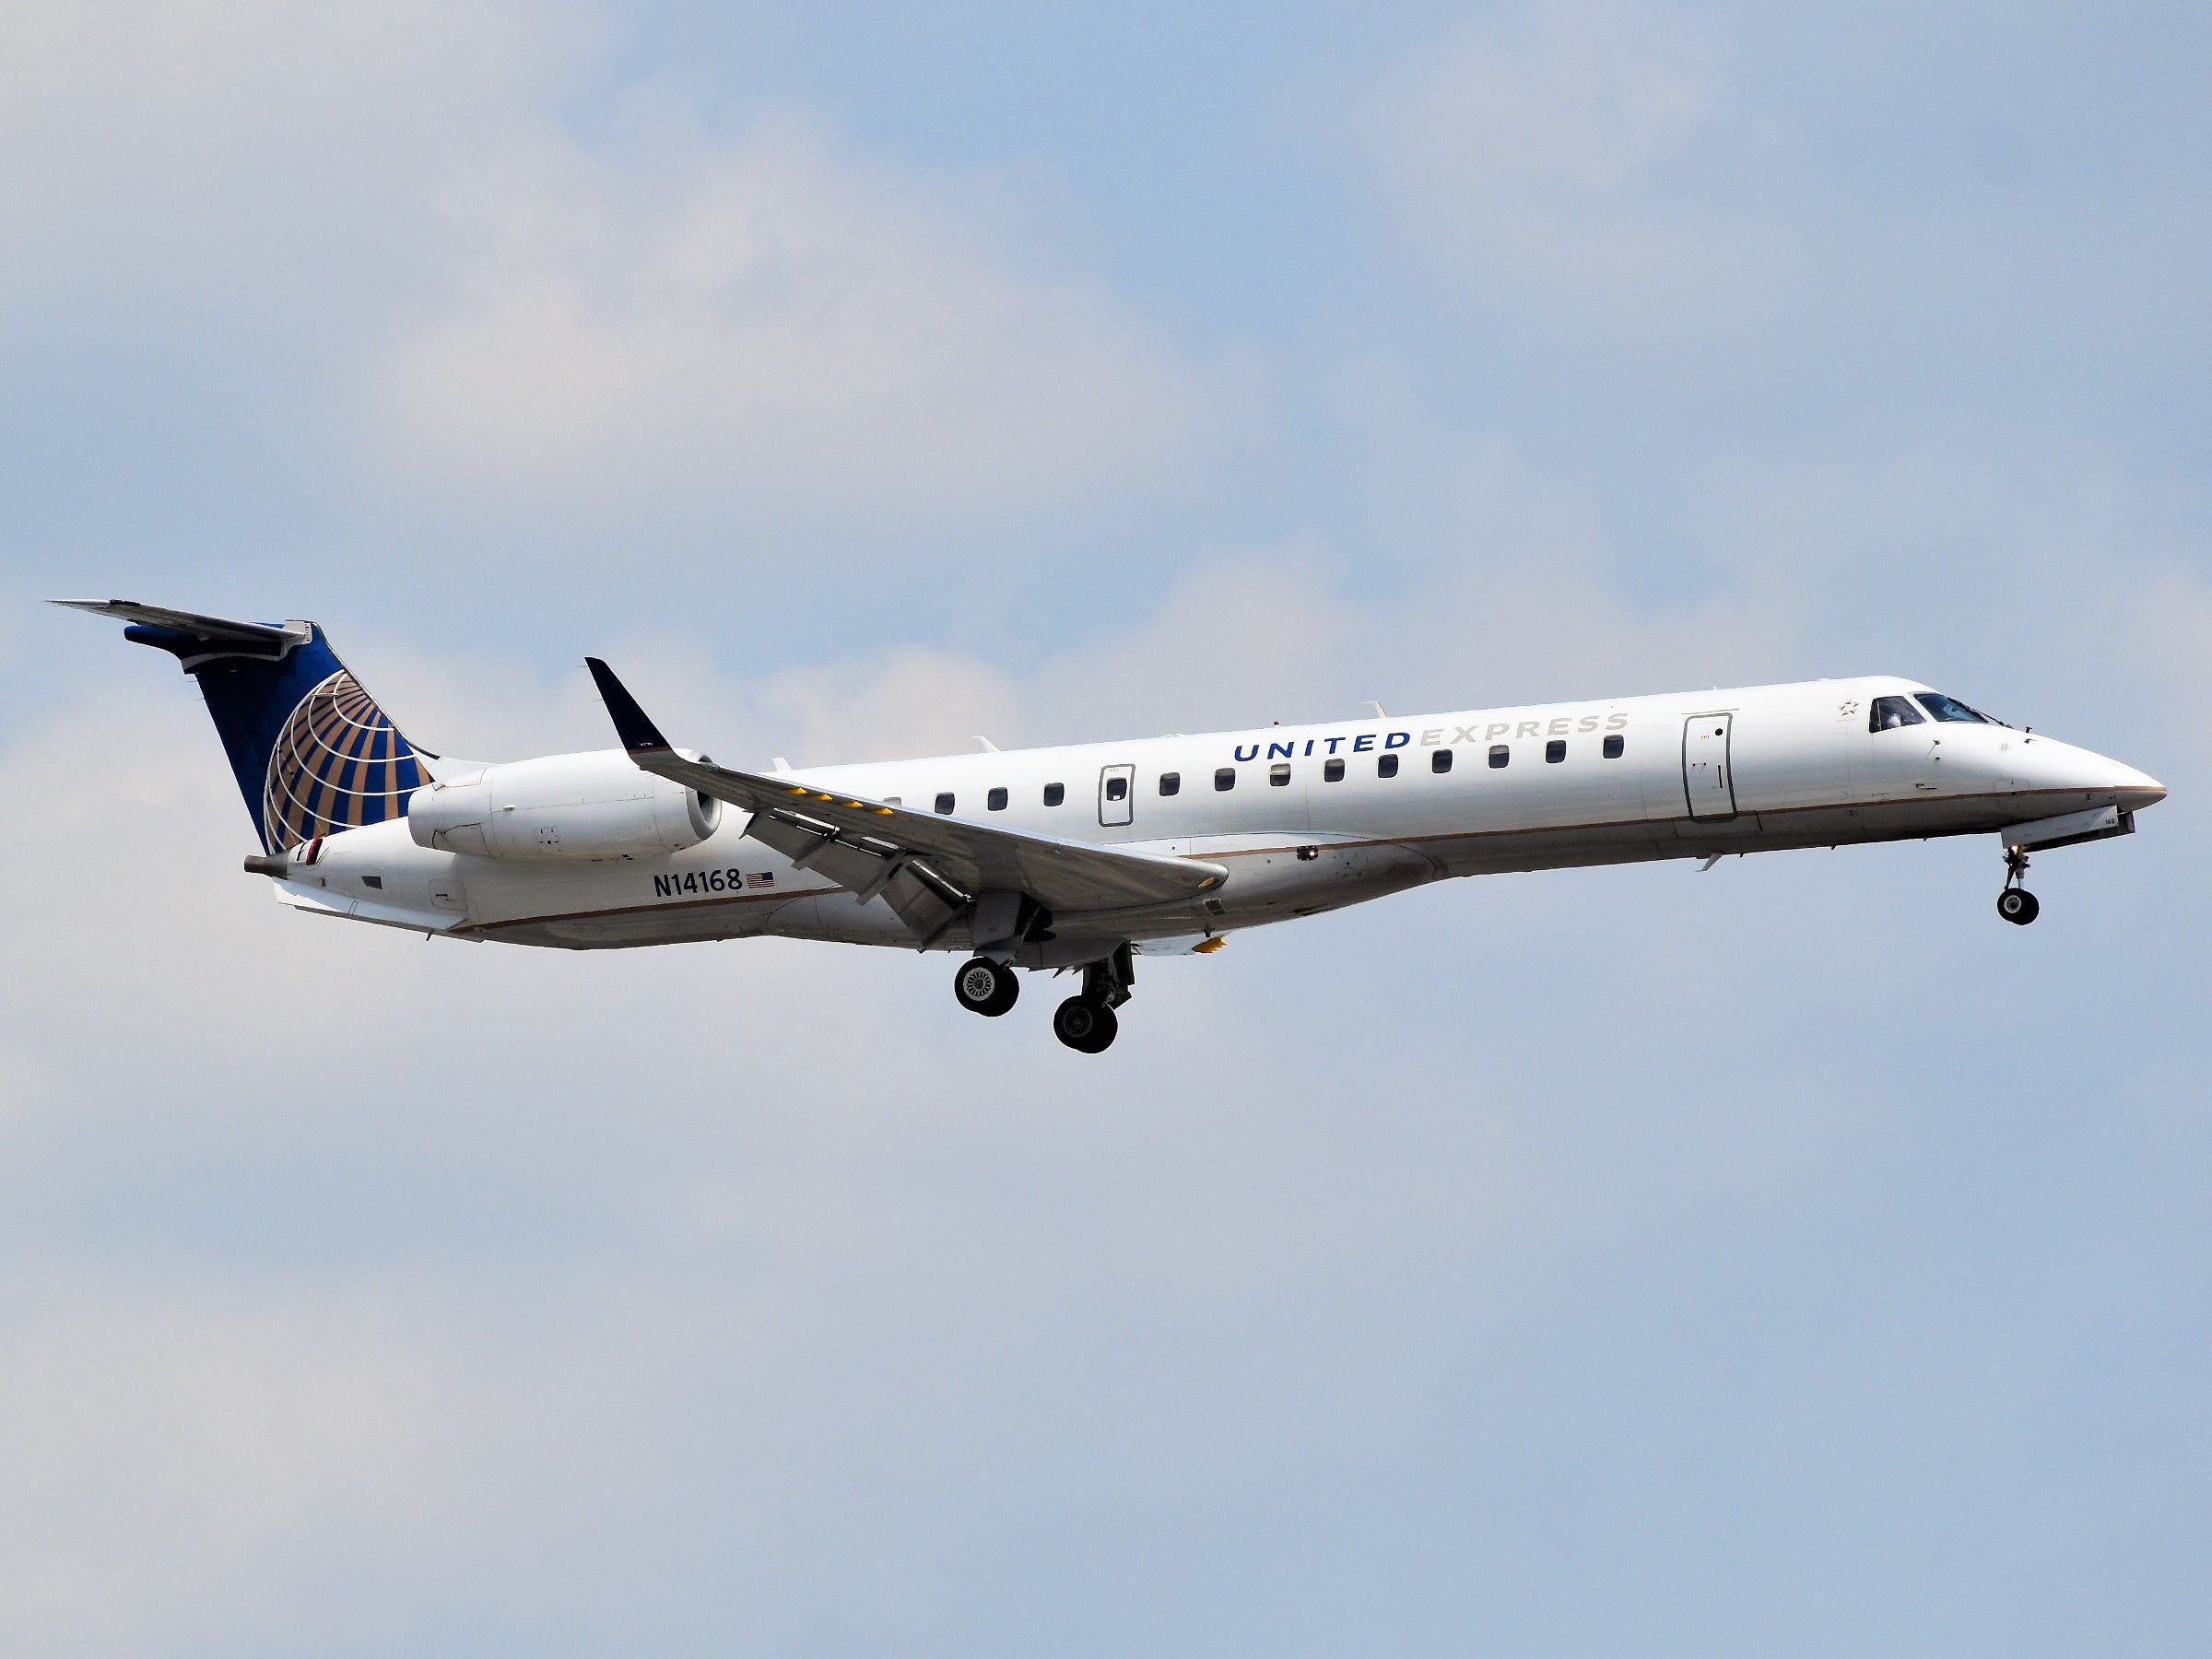 The incident happened on a Commutair flight operating as United Express&nbsp;